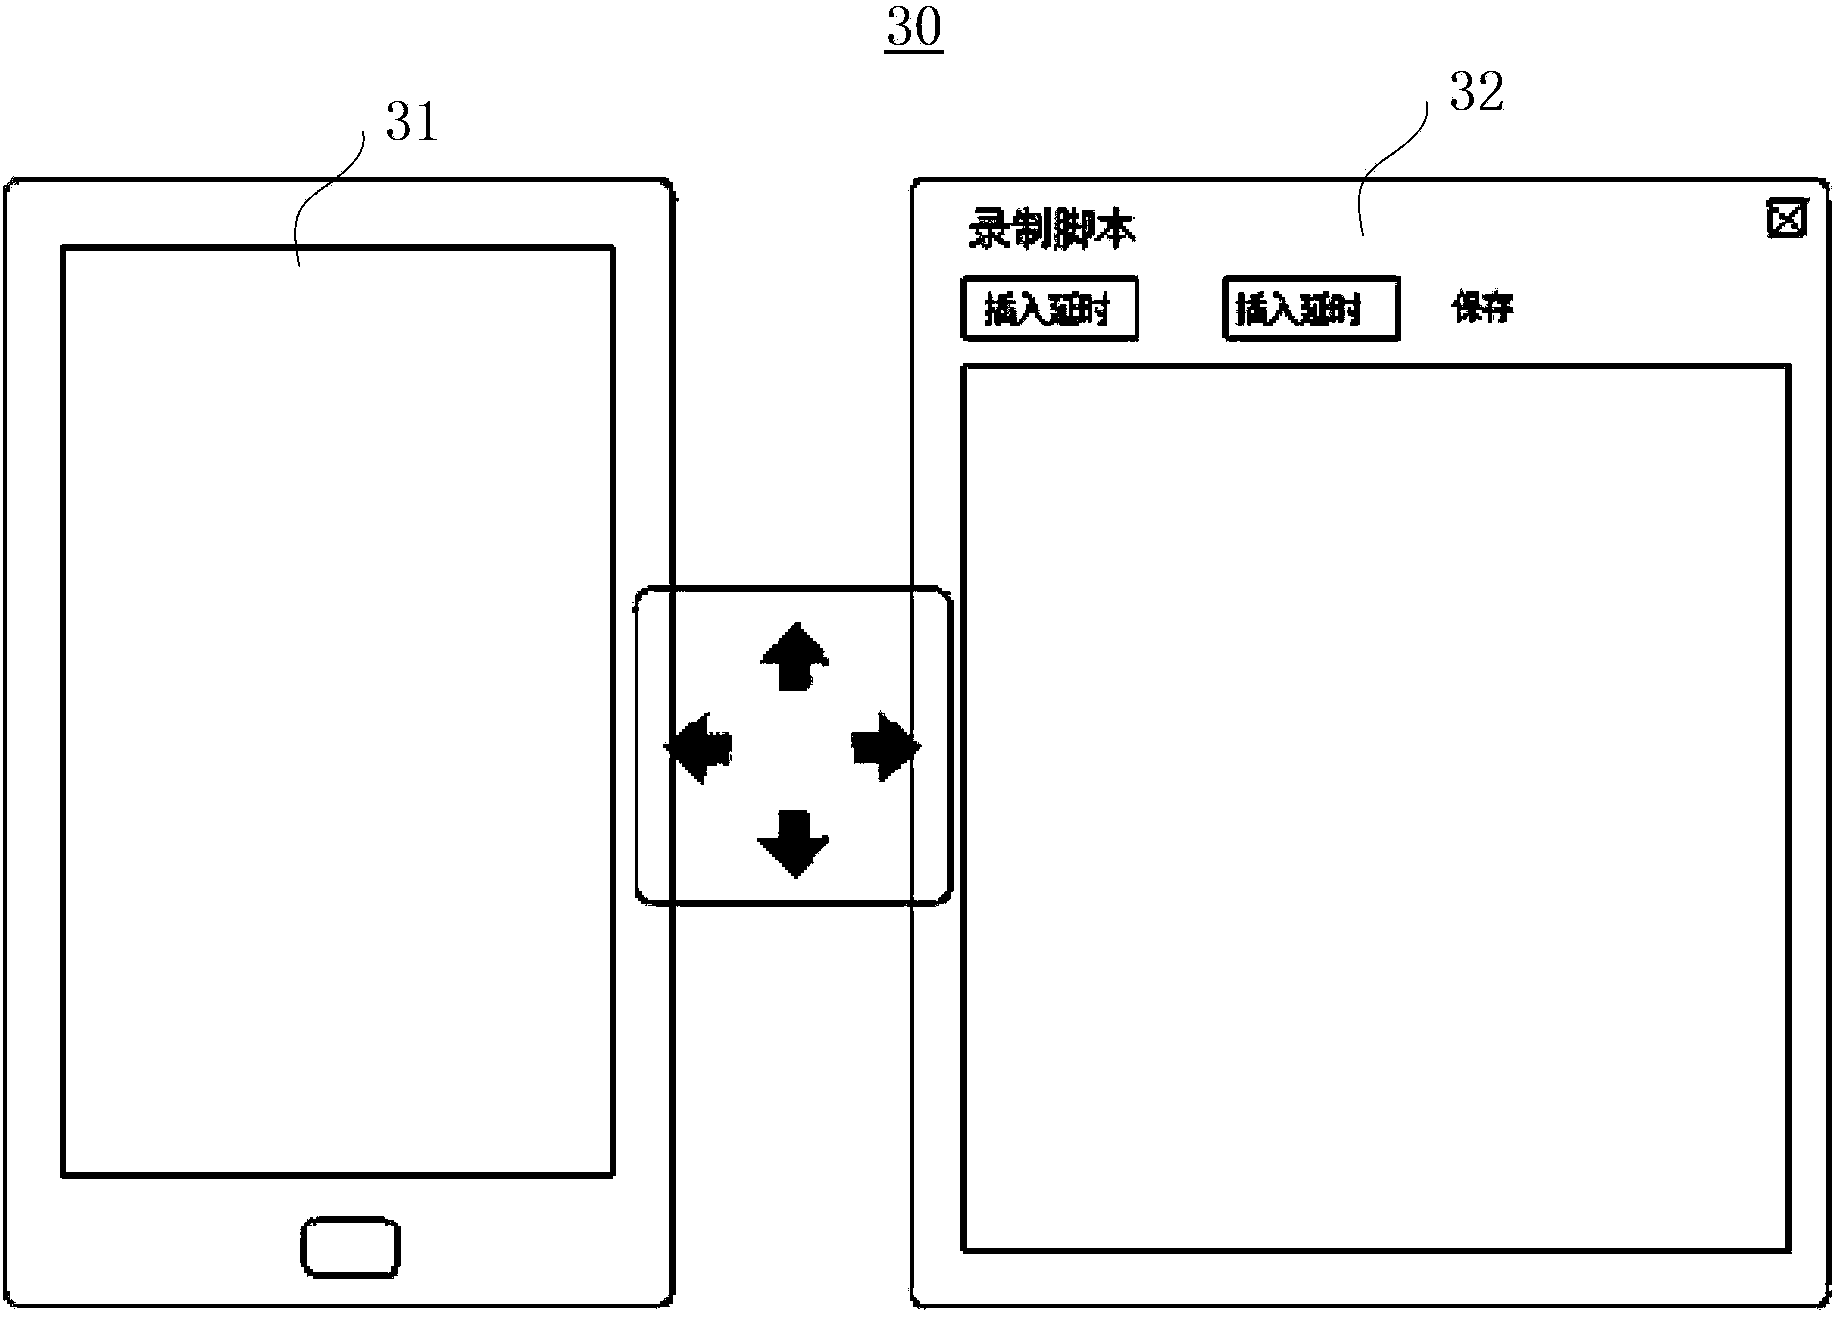 System and method for realizing user interface interaction through remotely controlling data terminal